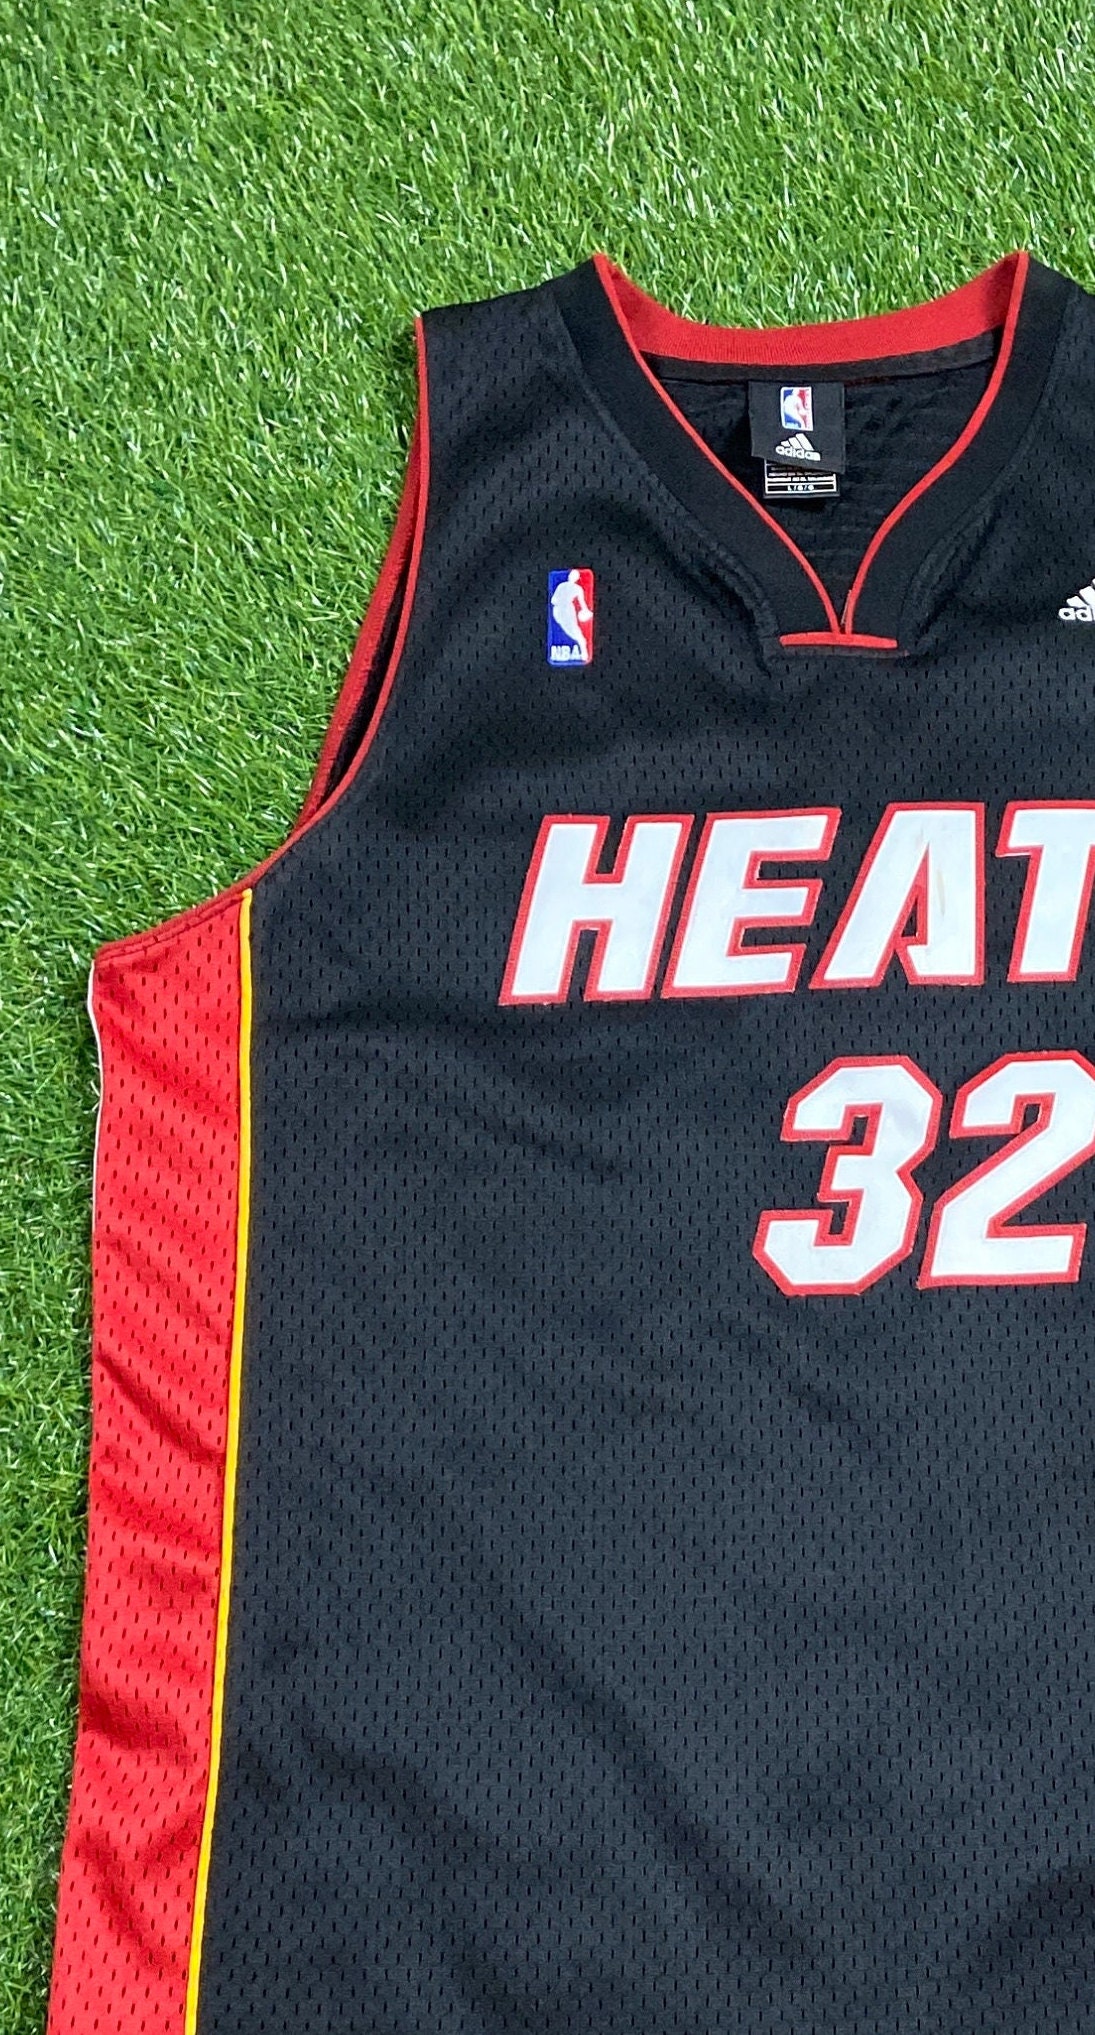 Vintage Miami Heat Shaquille O'neal 32 Jersey Adidas Size 